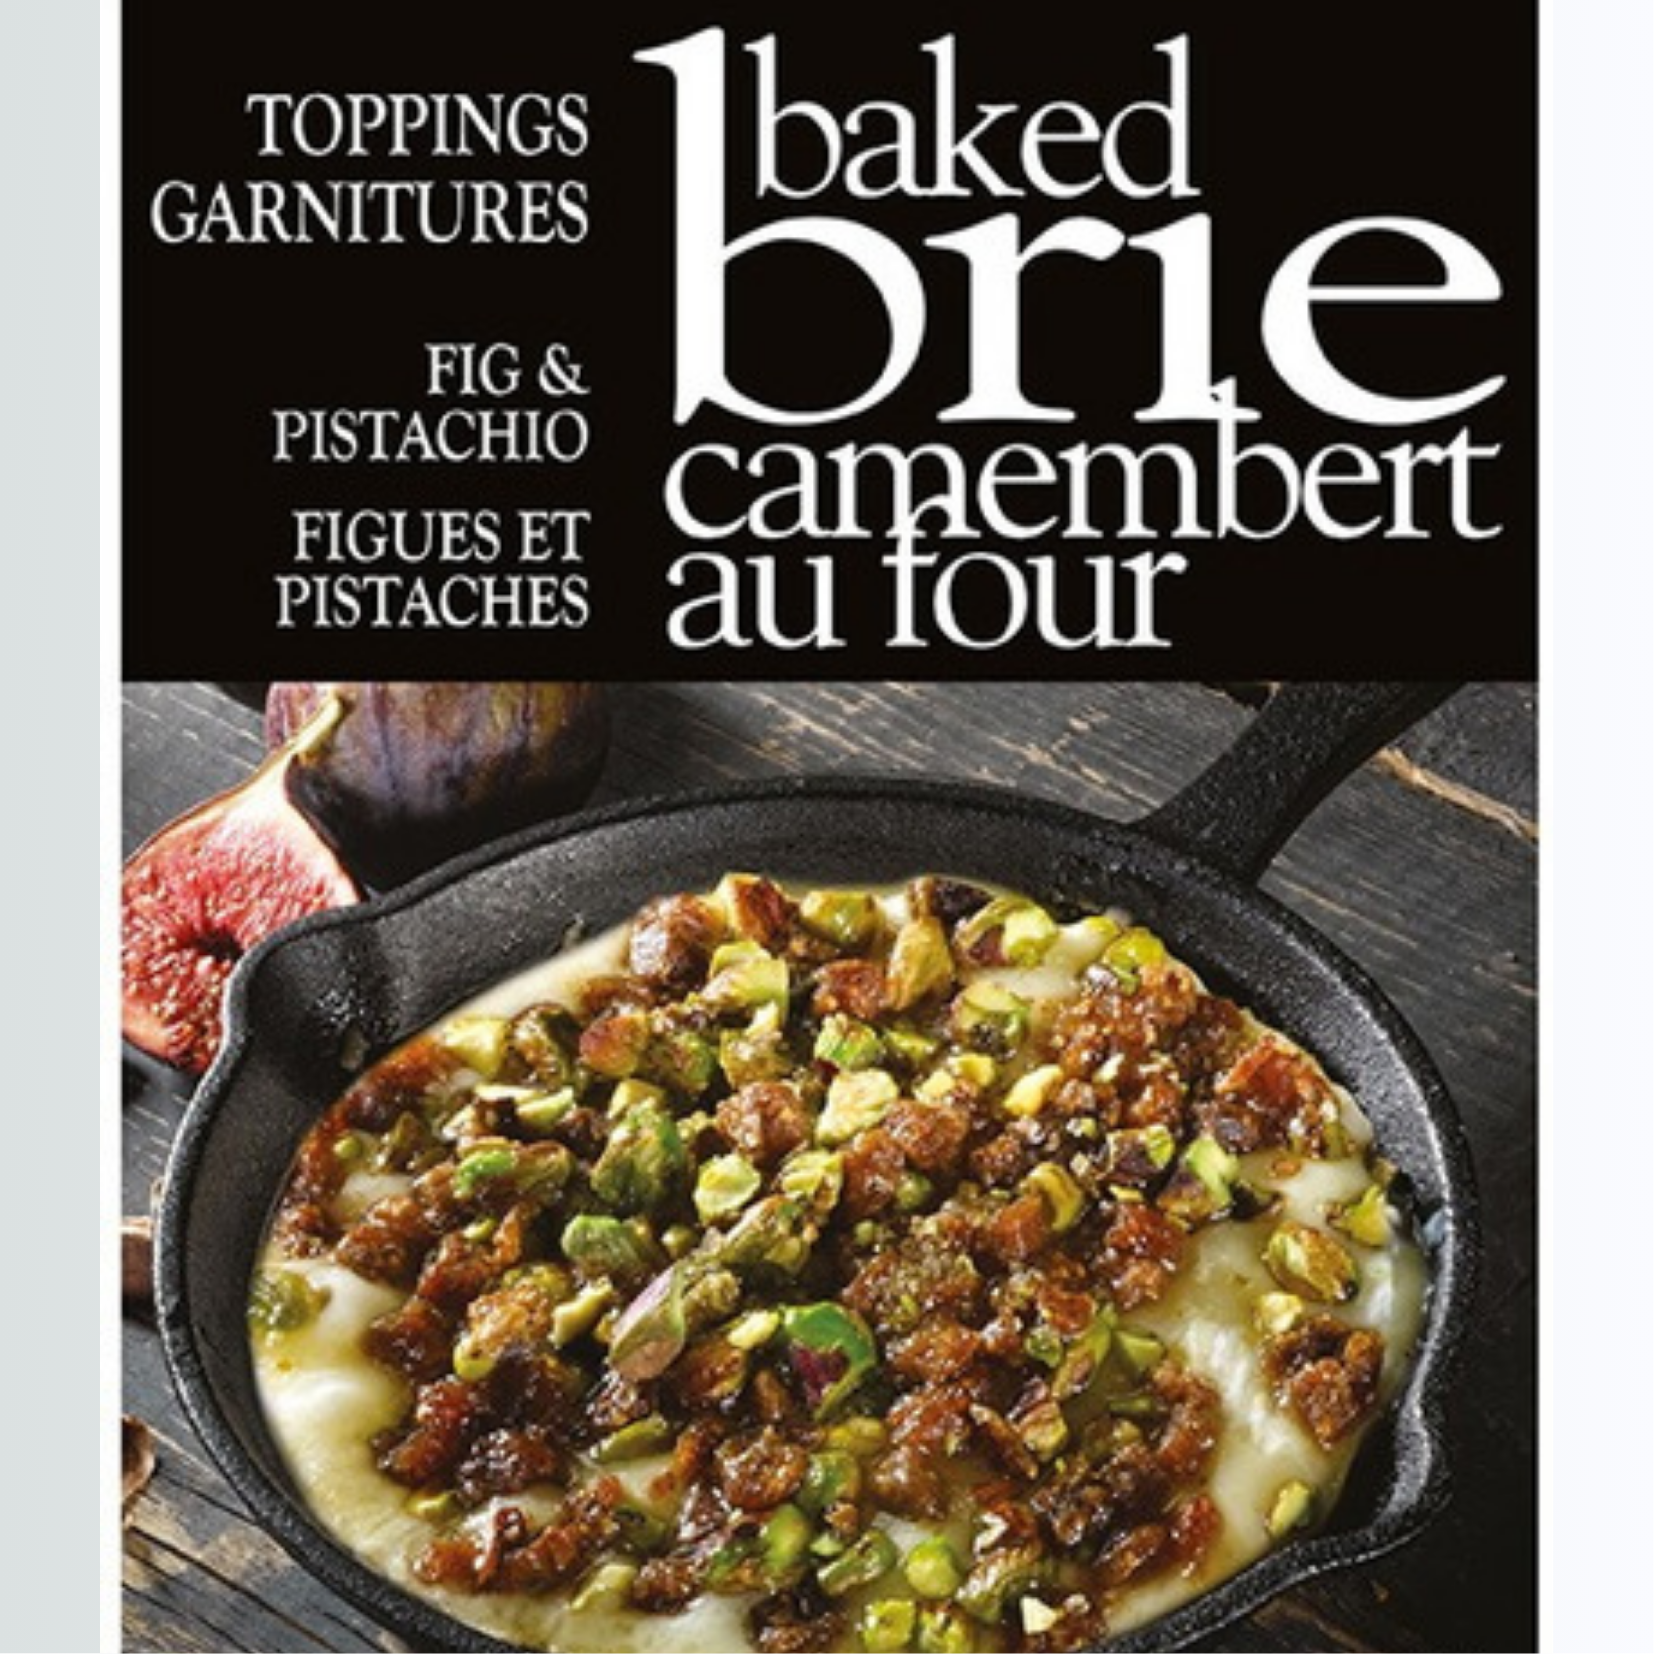 Gourmet du Village Fig & Pistachio Baked Brie Topping 52g